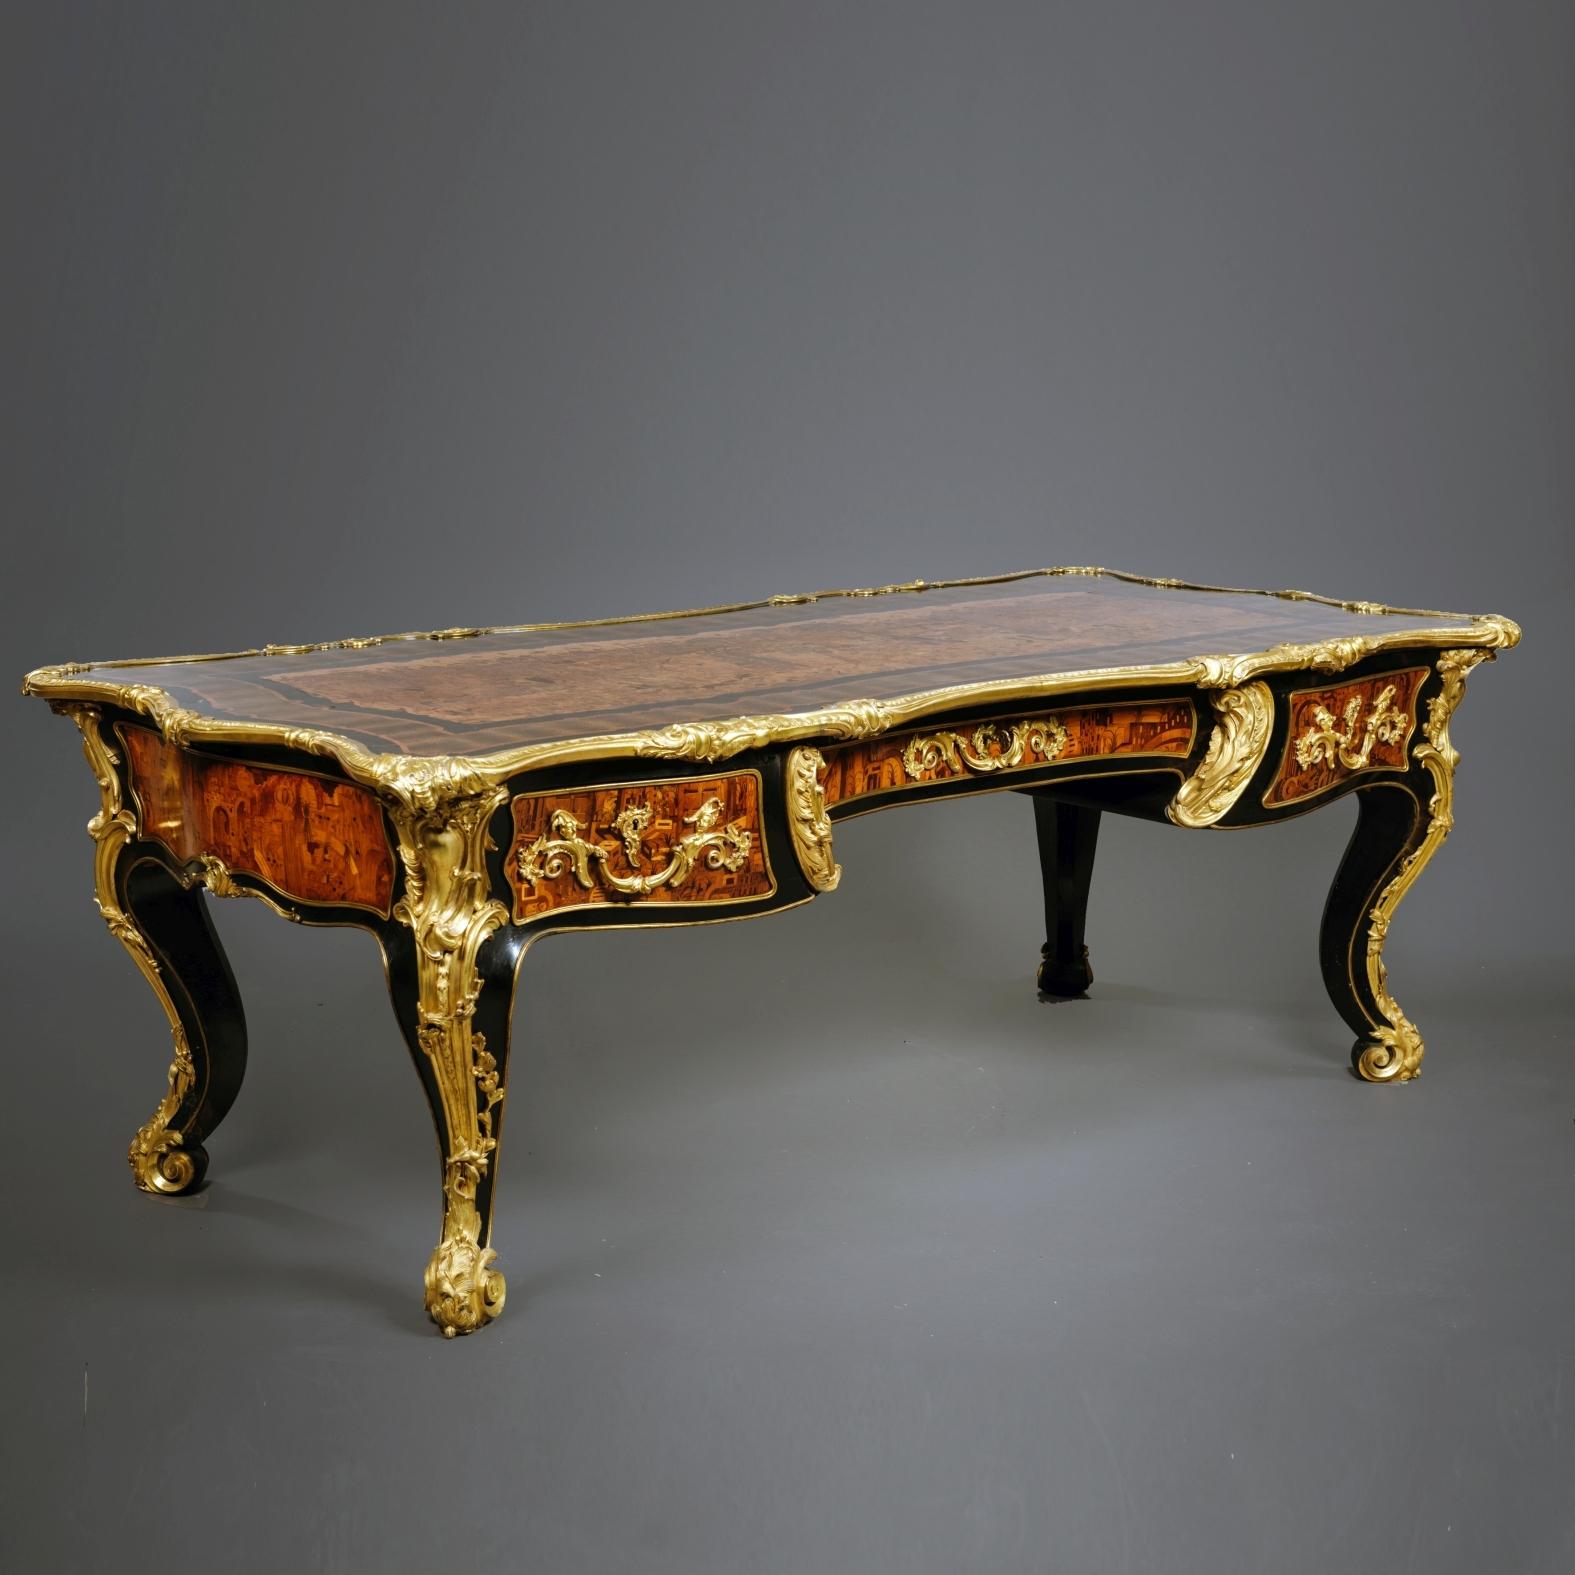 A magnificent and very rare Régence style marquetry inlaid grand bureau plat or writing desk.

Inscribed to the carcass 'Moreaux 72'.

Dating from the second half of the nineteenth century this magnificent and very rare bureau plat has finely